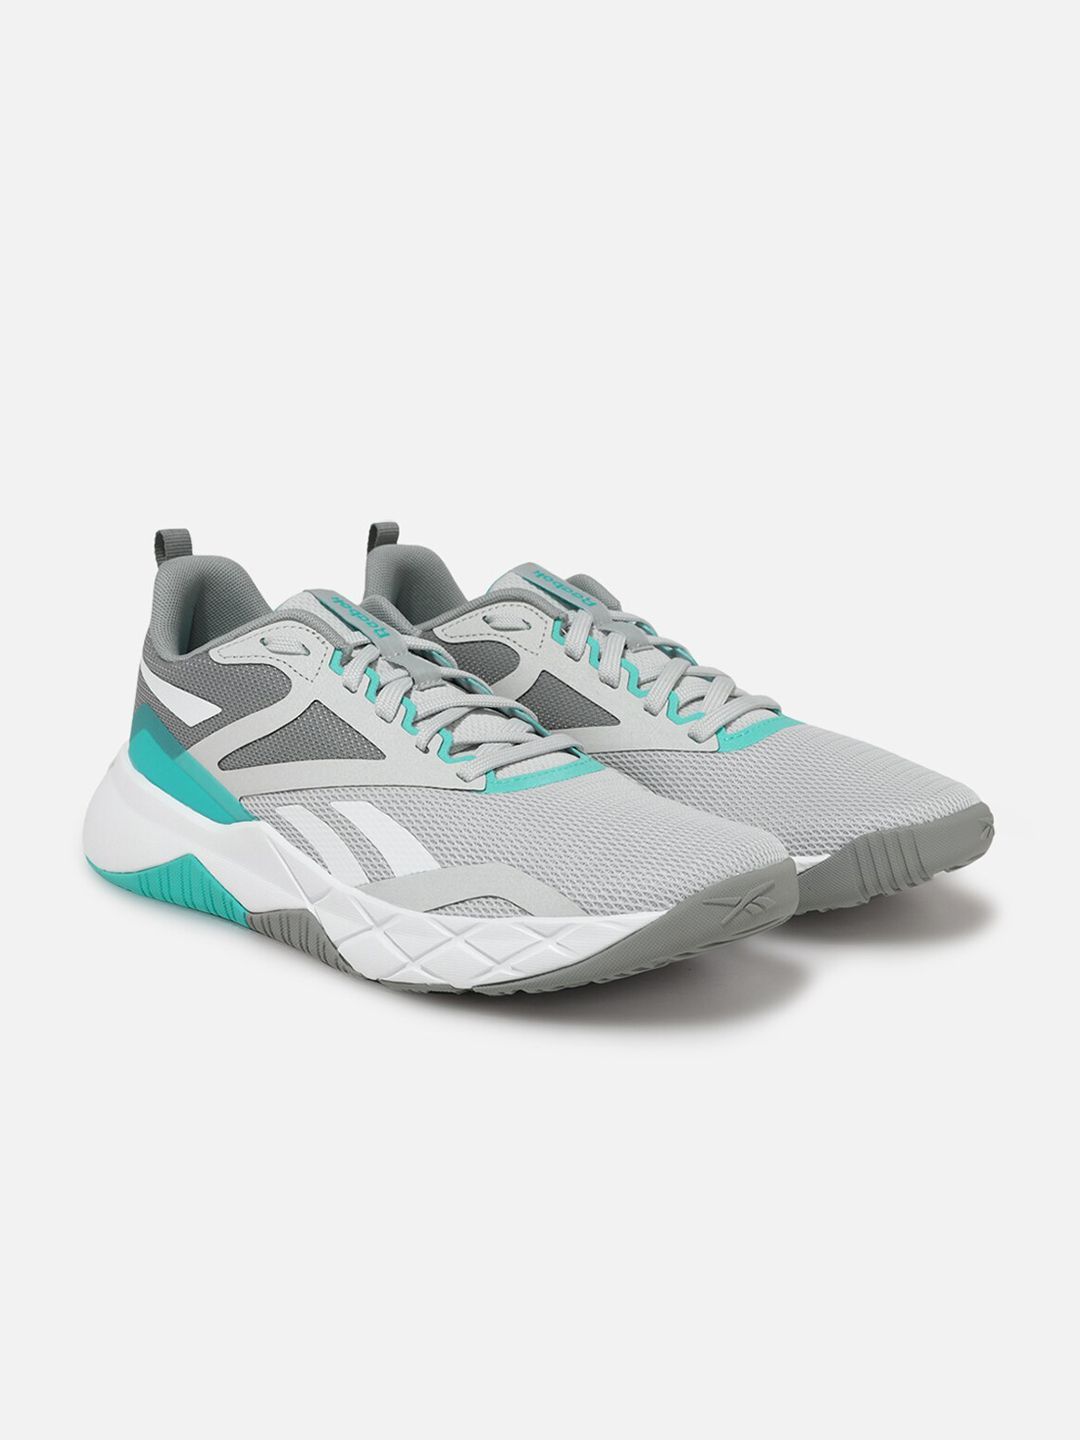 Reebok Women Training Nfx Trainer Shoes Price in India